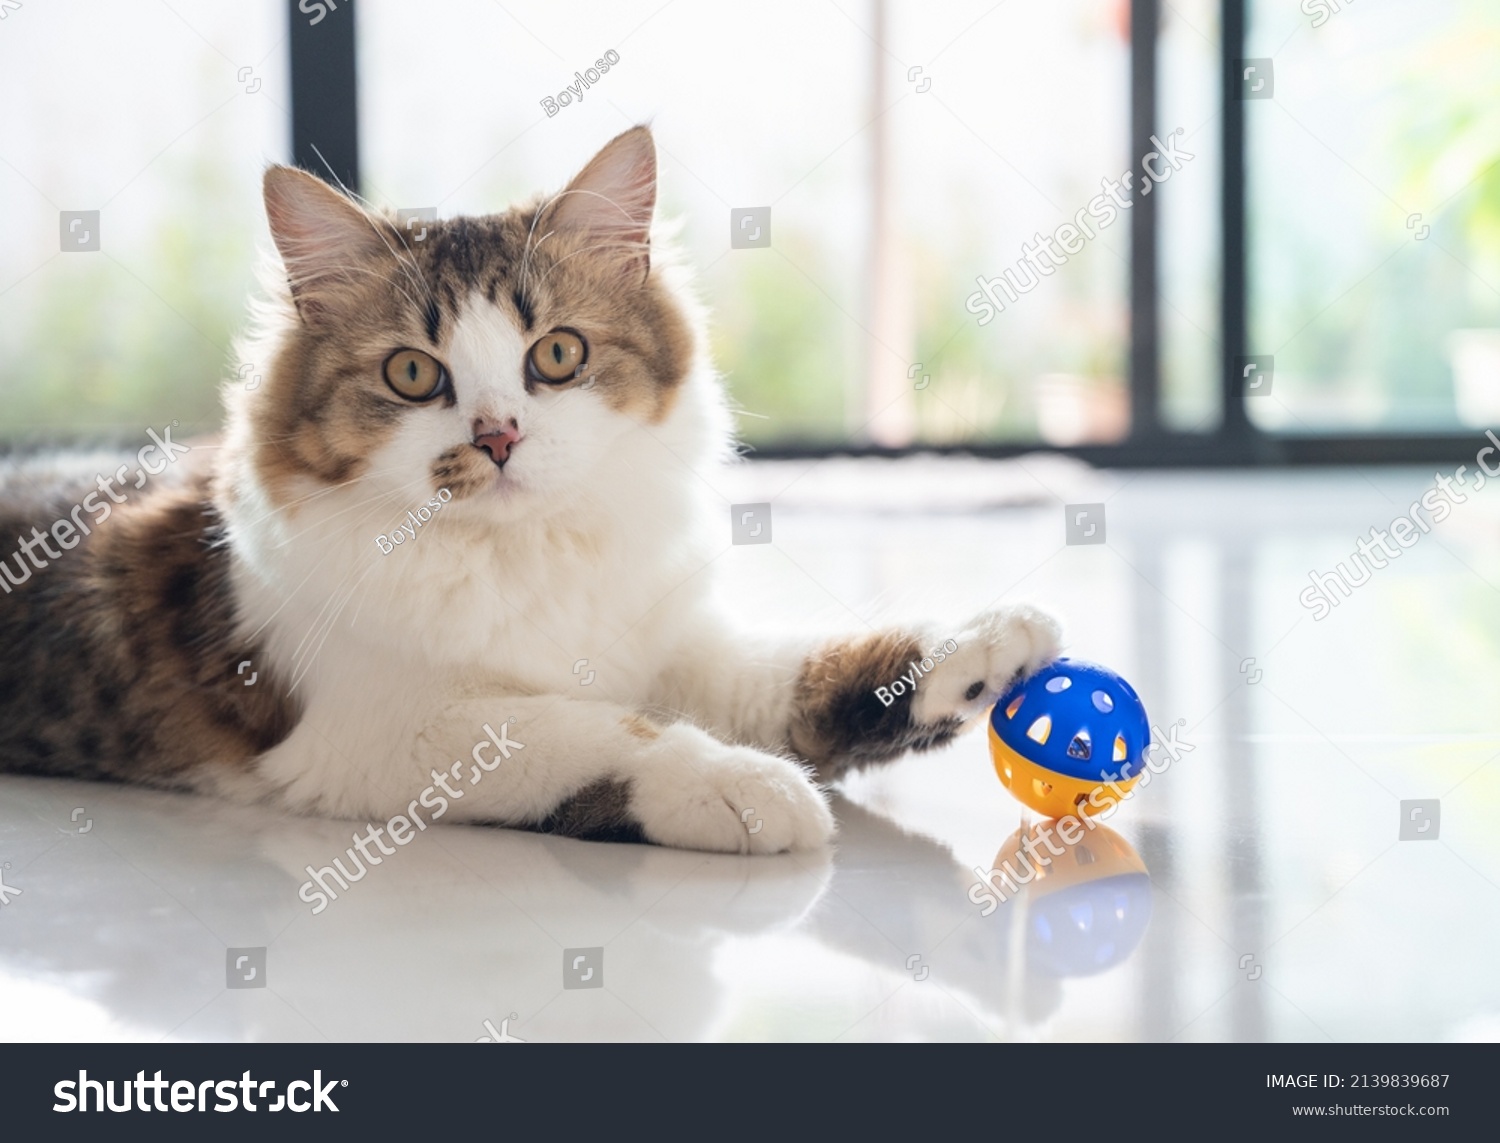 Cute crossbreed Persian cat playing with a ball. A mixed breed cat is a cross between cats of two different breeds or a purebred cat and a domestic cat. #2139839687